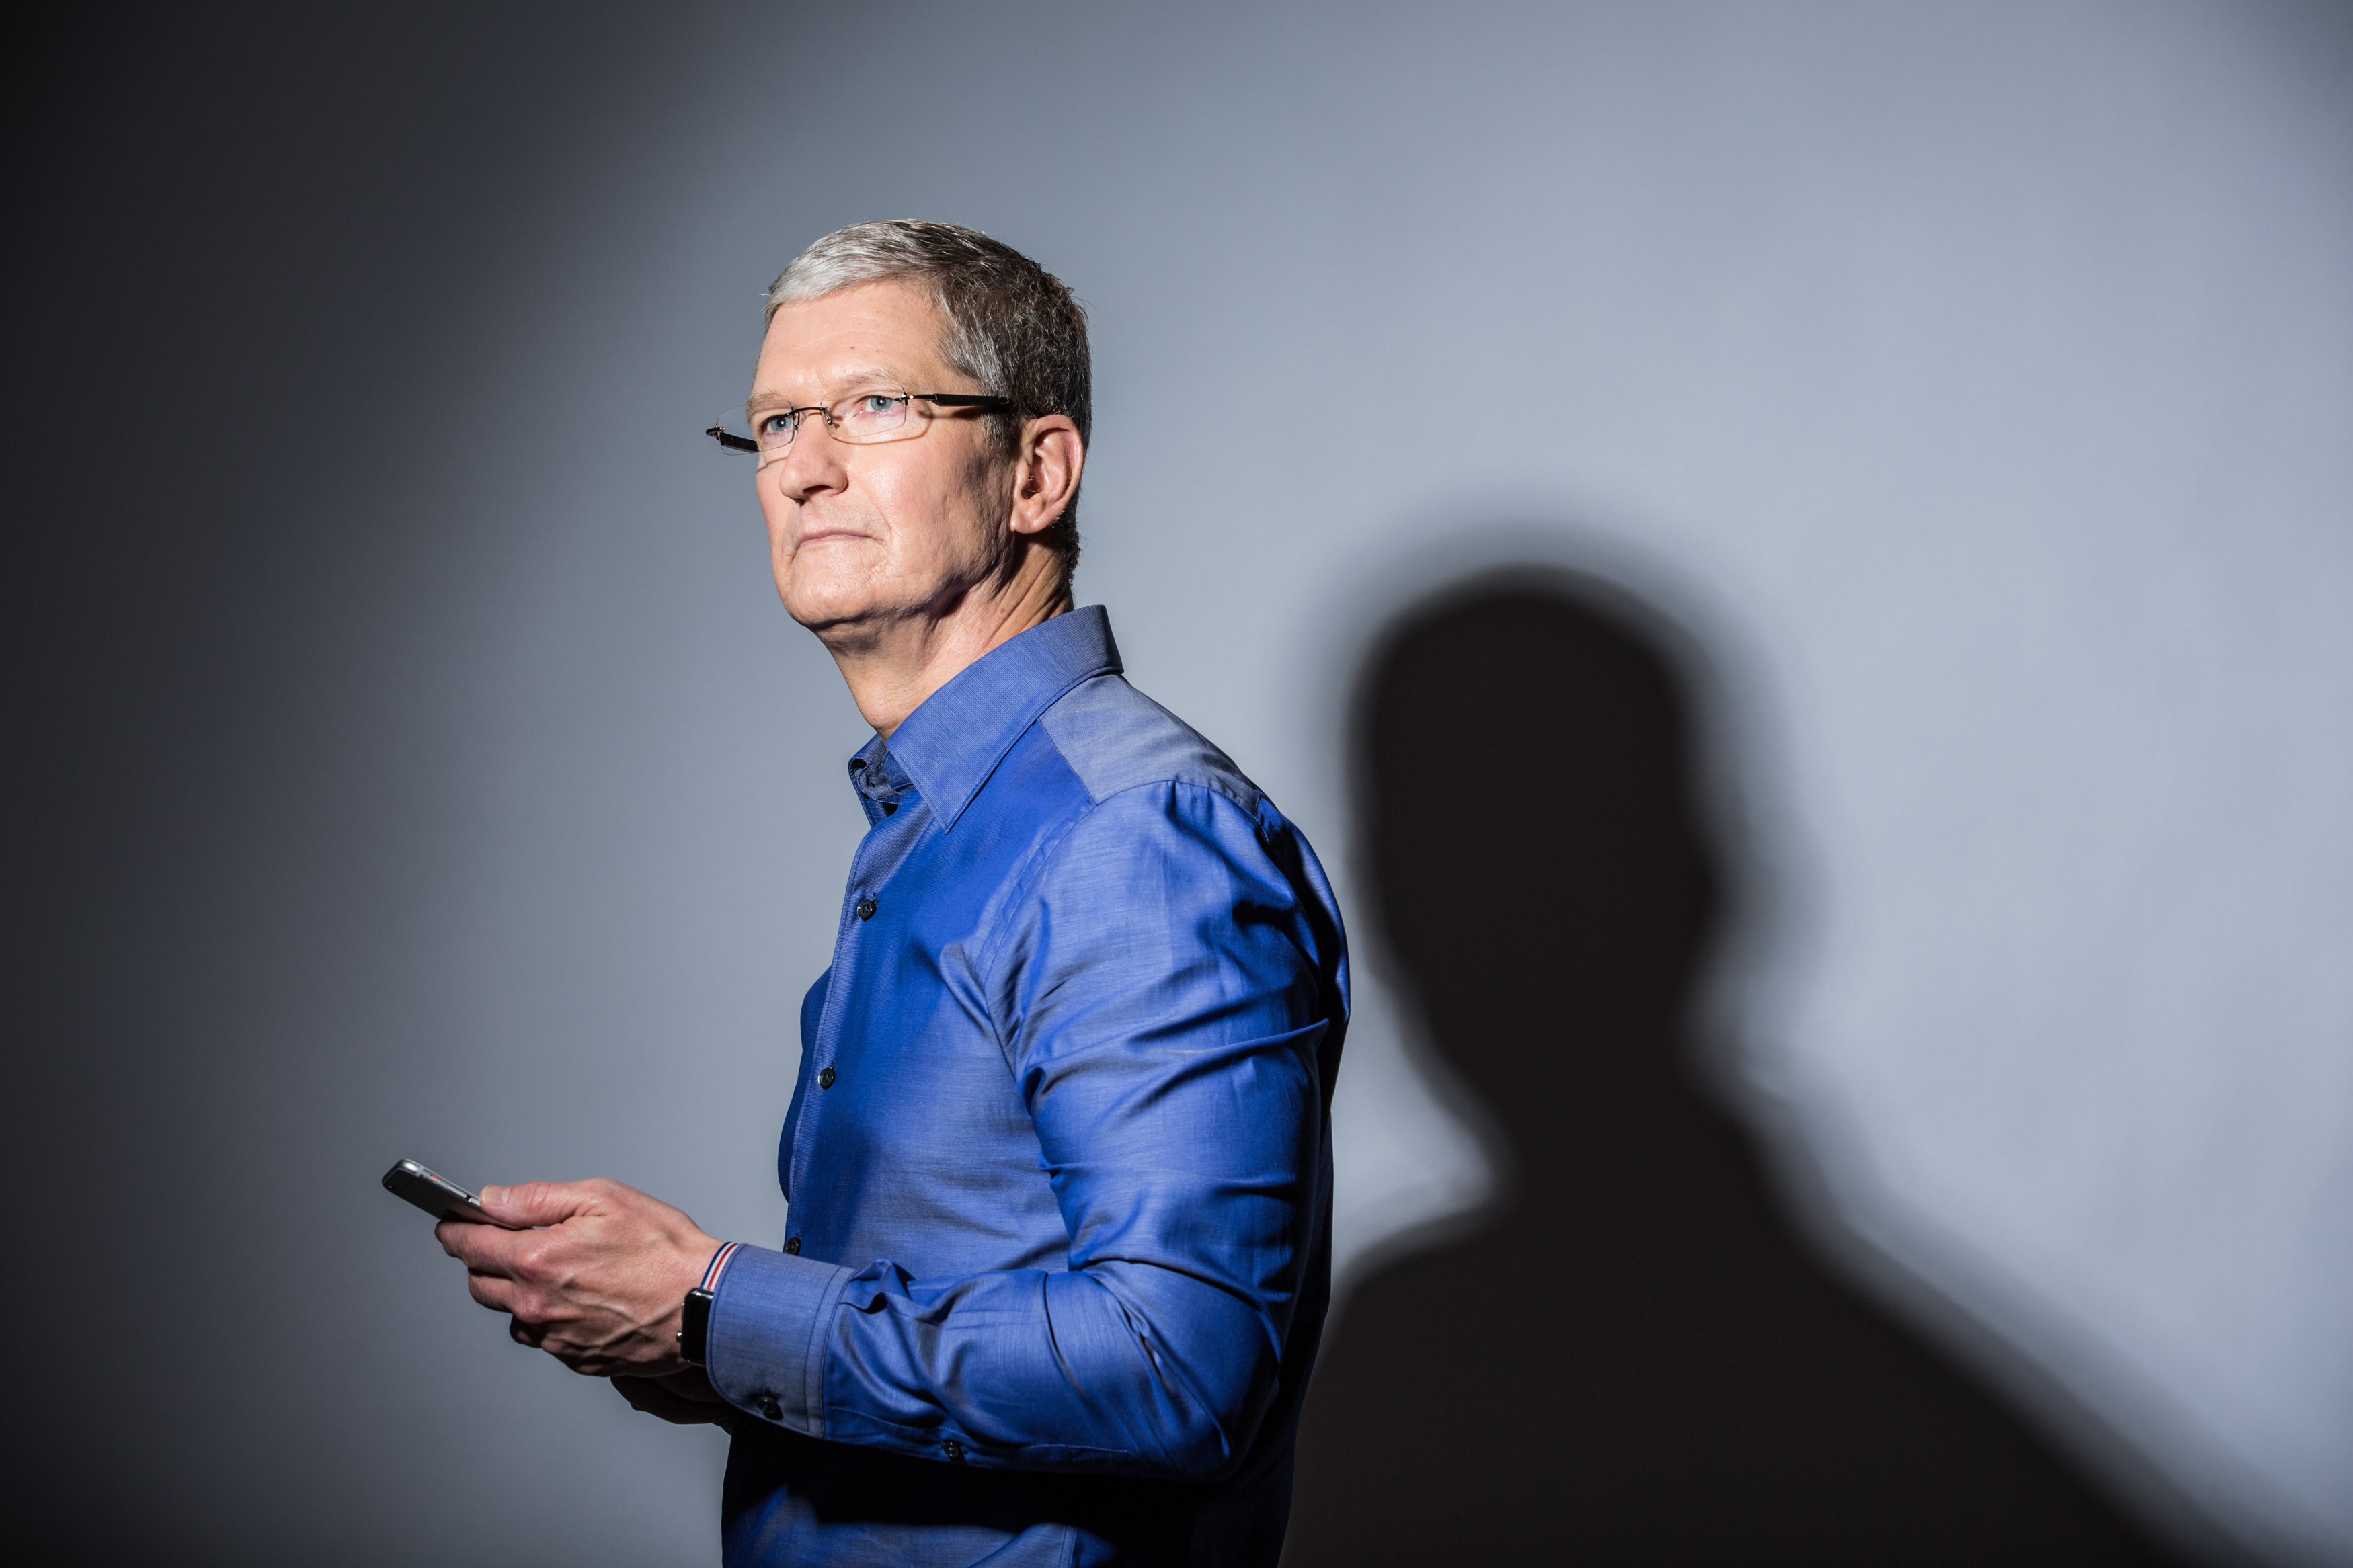 Apple CEO Tim Cook poses for a portrait at Apple's global headquarters in Cupertino, California on July 28, 2016. (The Washington Post&mdash;The Washington Post/Getty Images)